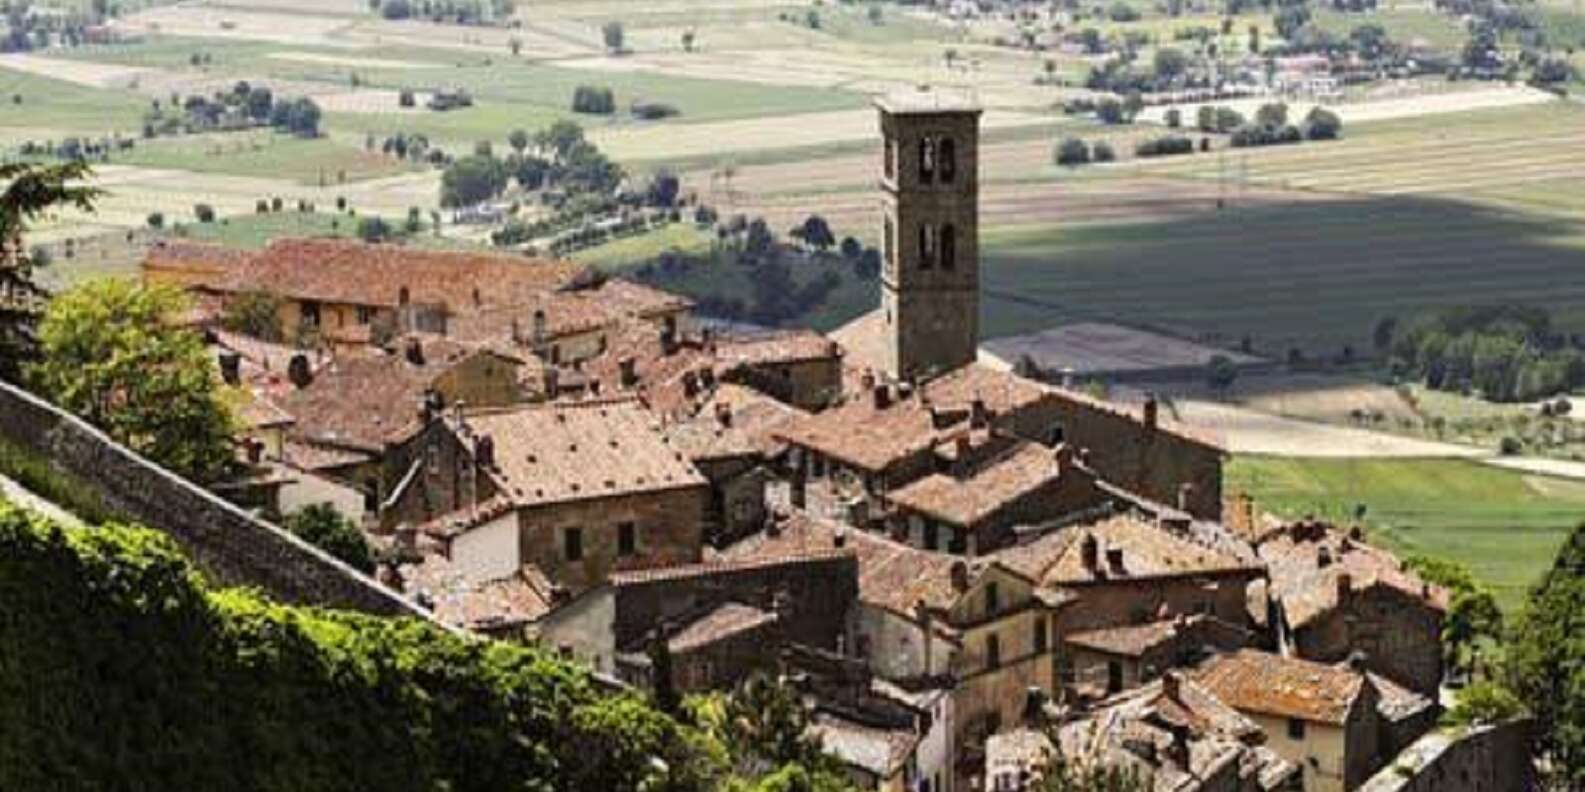 things to do in Arezzo